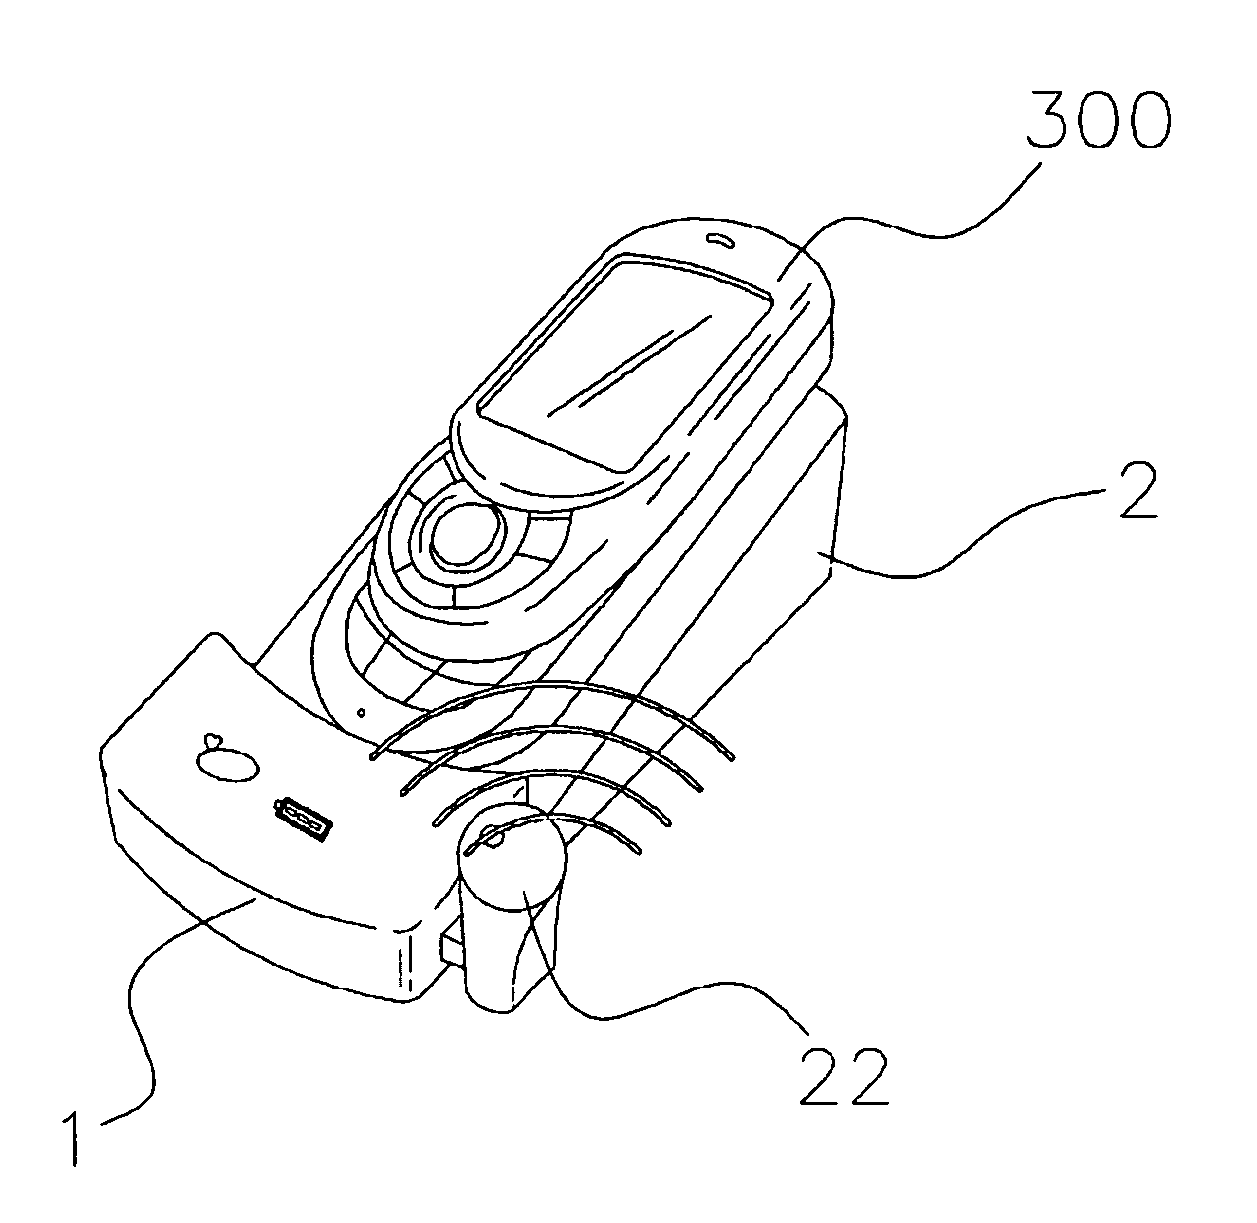 Non-contact charger available of wireless data and power transmission, charging battery-pack and mobile device using non-contact charger